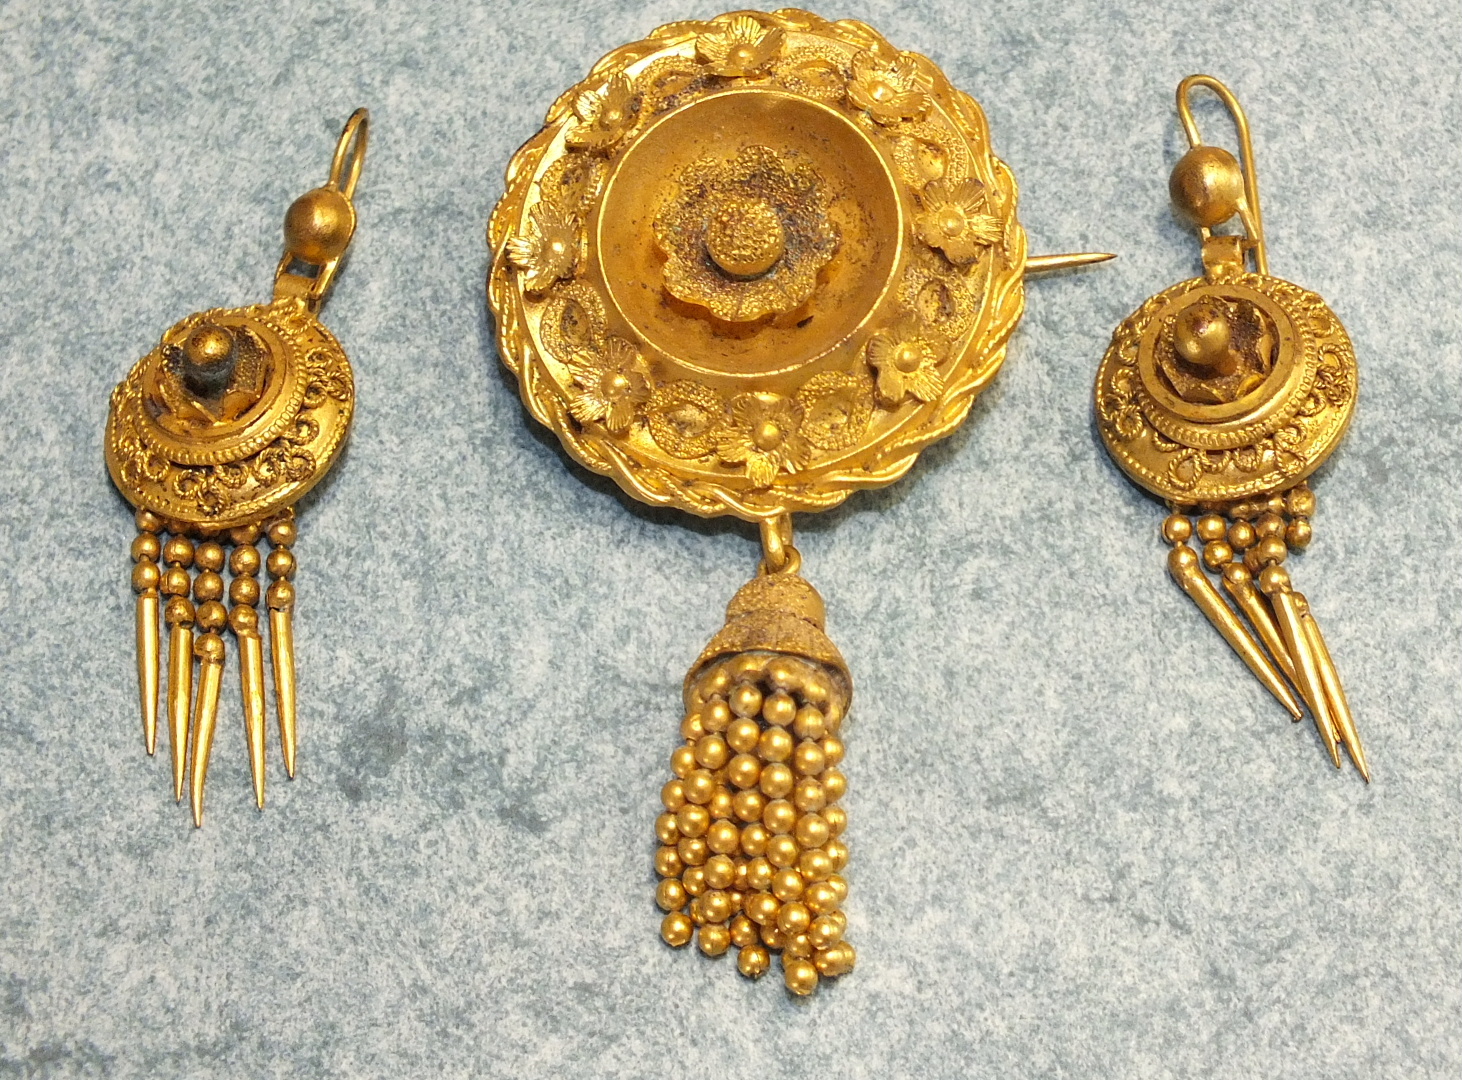 A Victorian gilt metal brooch with applied and cast decoration and tassel below and a pair of